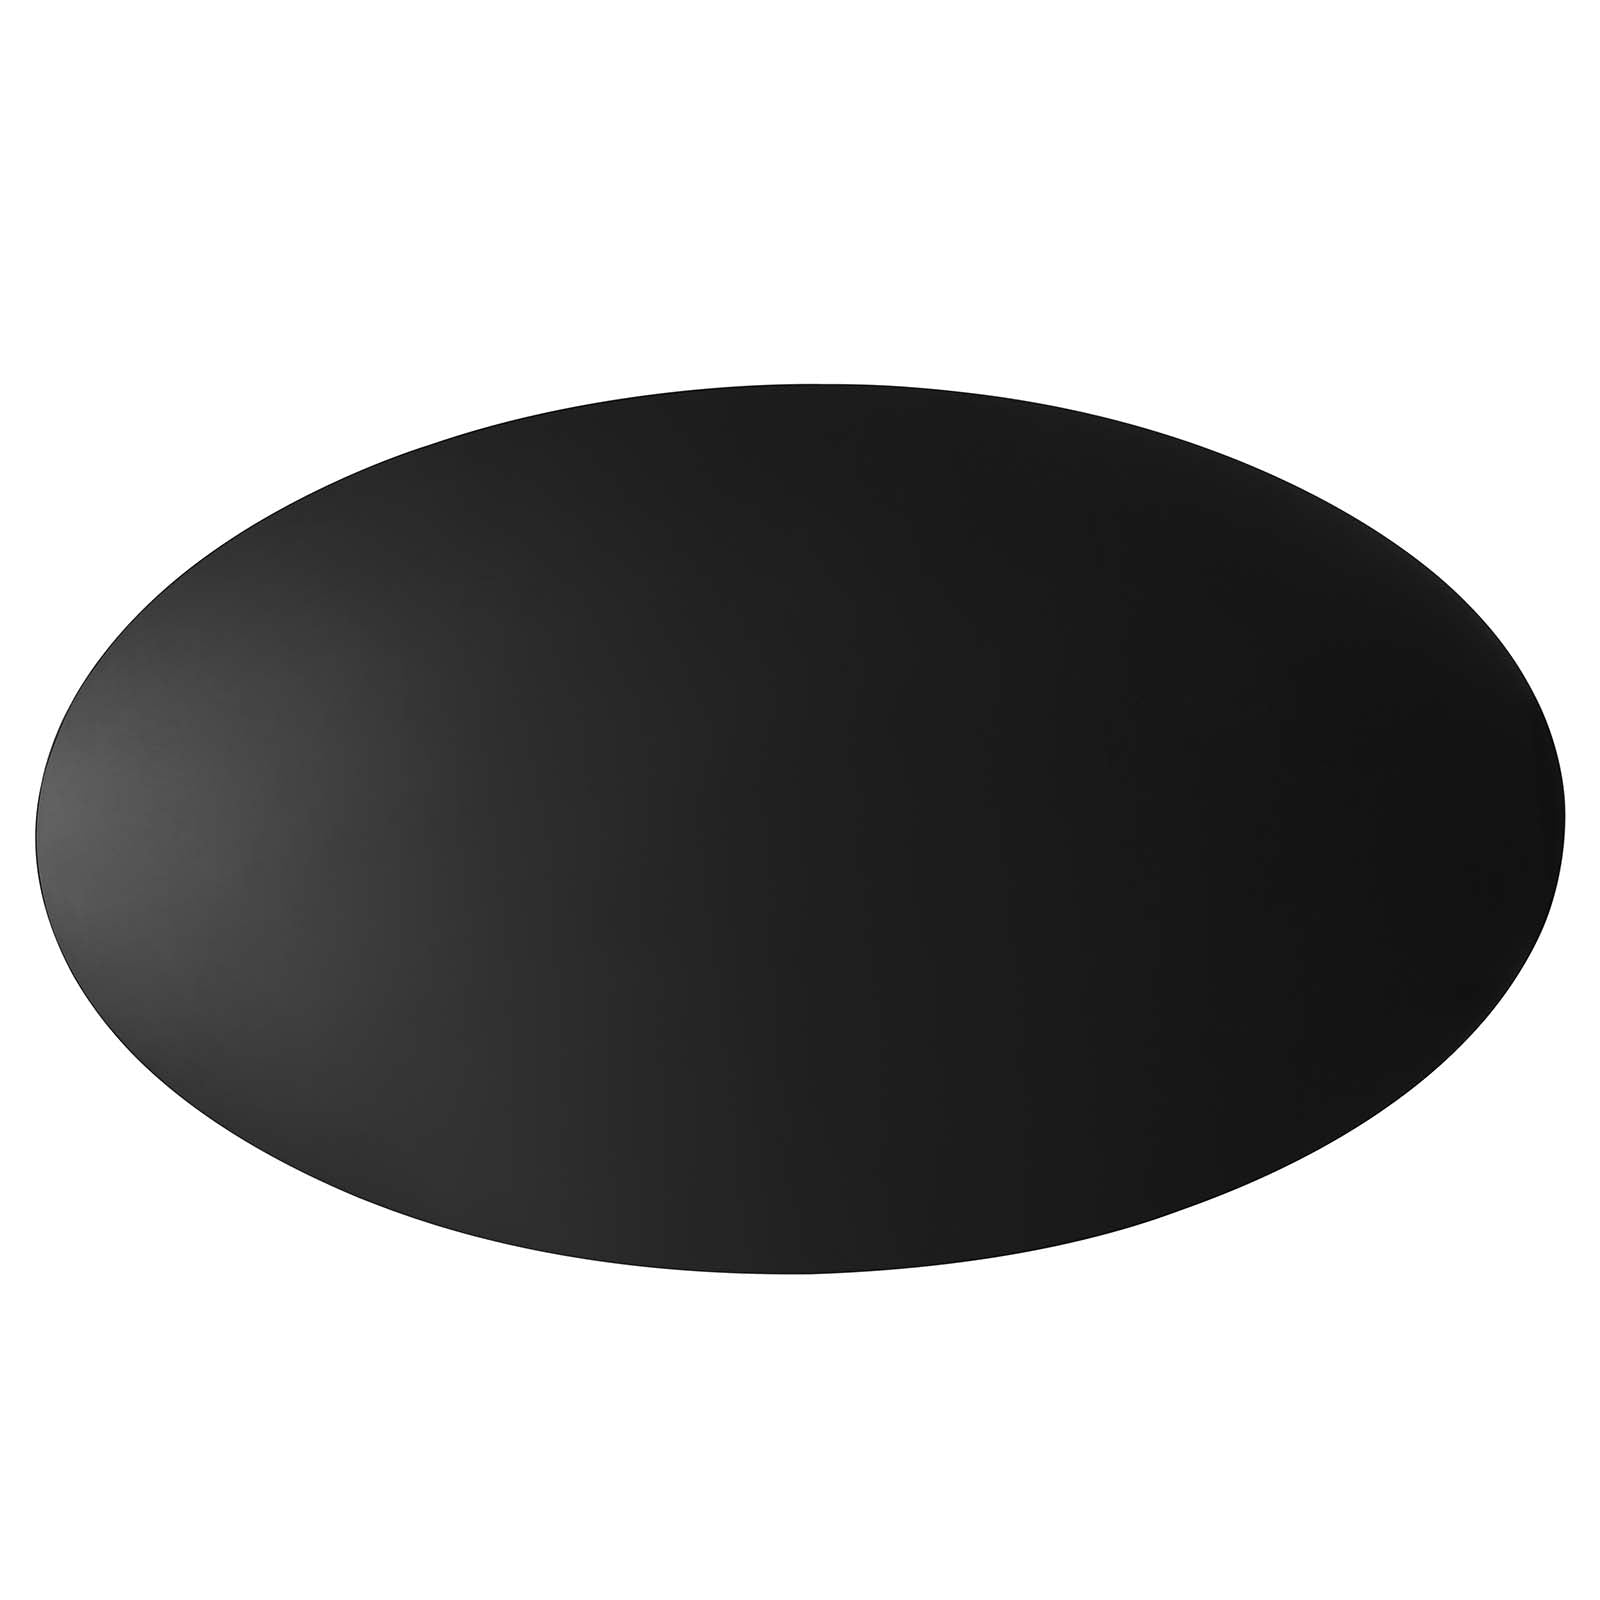 Modway Dining Tables - Provision 75" Oval Dining Table Black